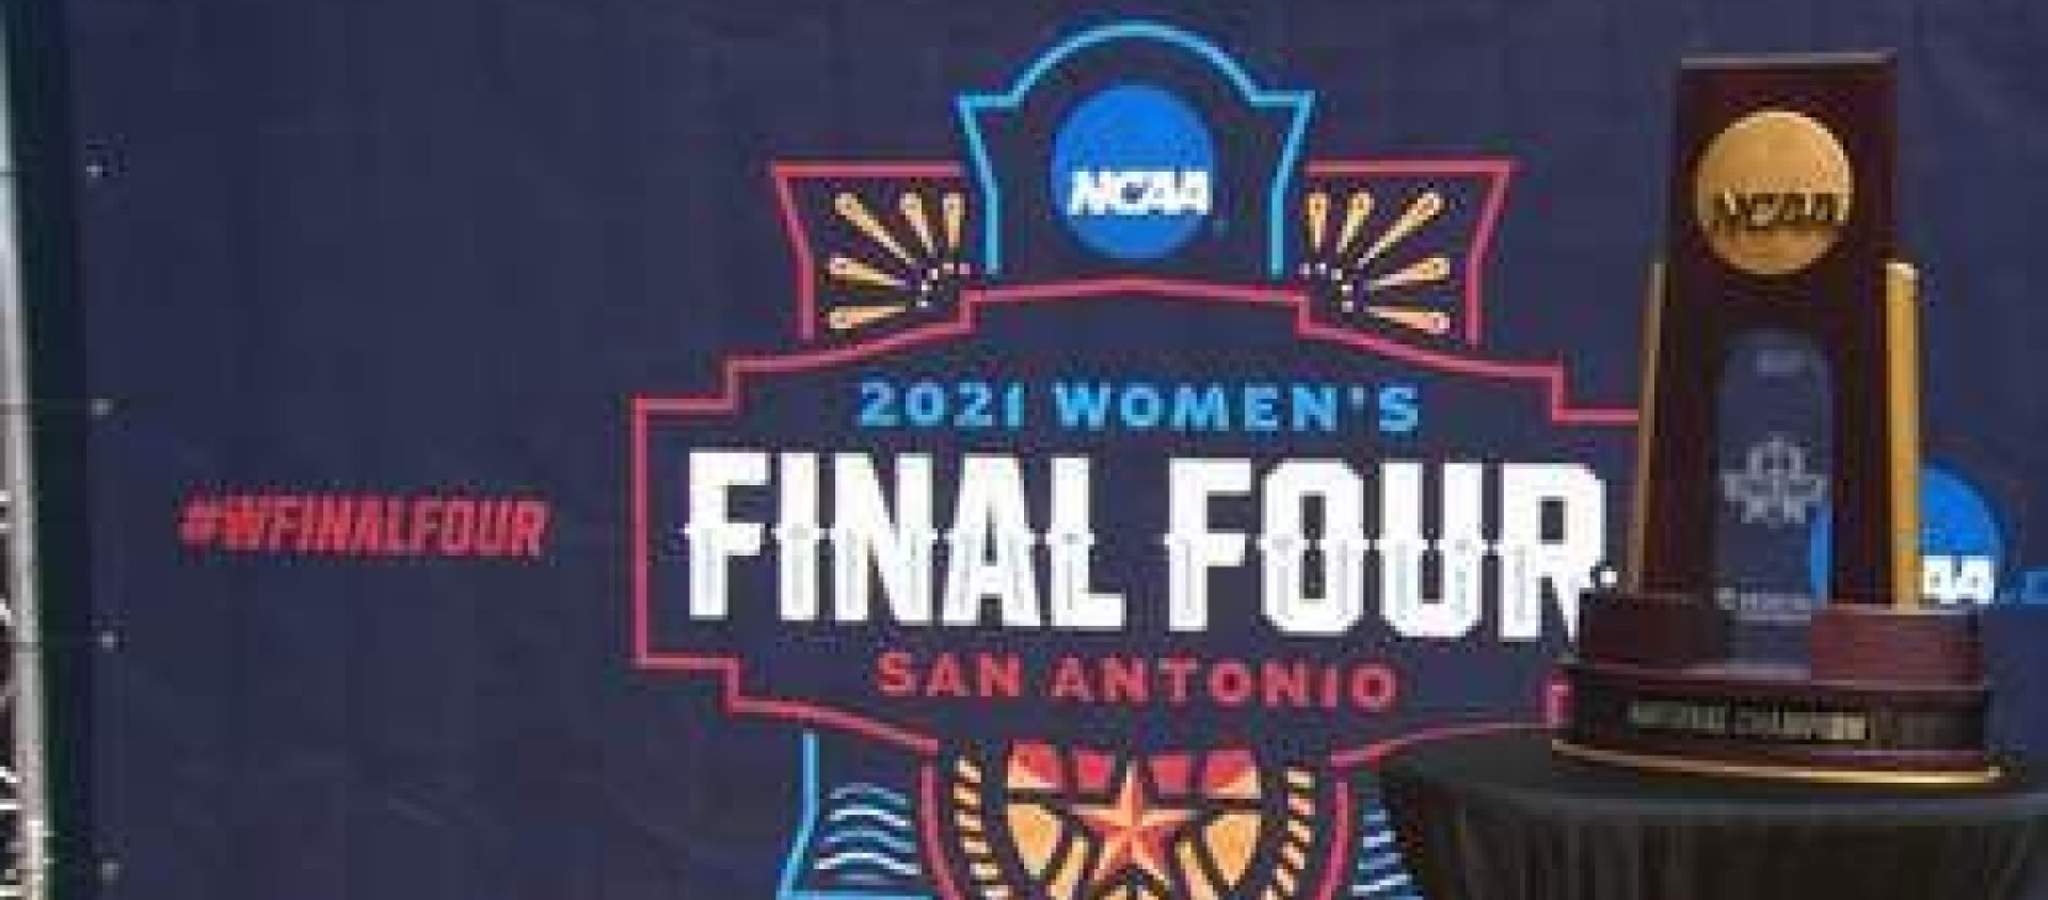 NCAA admits falling ‘short’ in preparations for women’s tournament in San Antonio after viral tweet